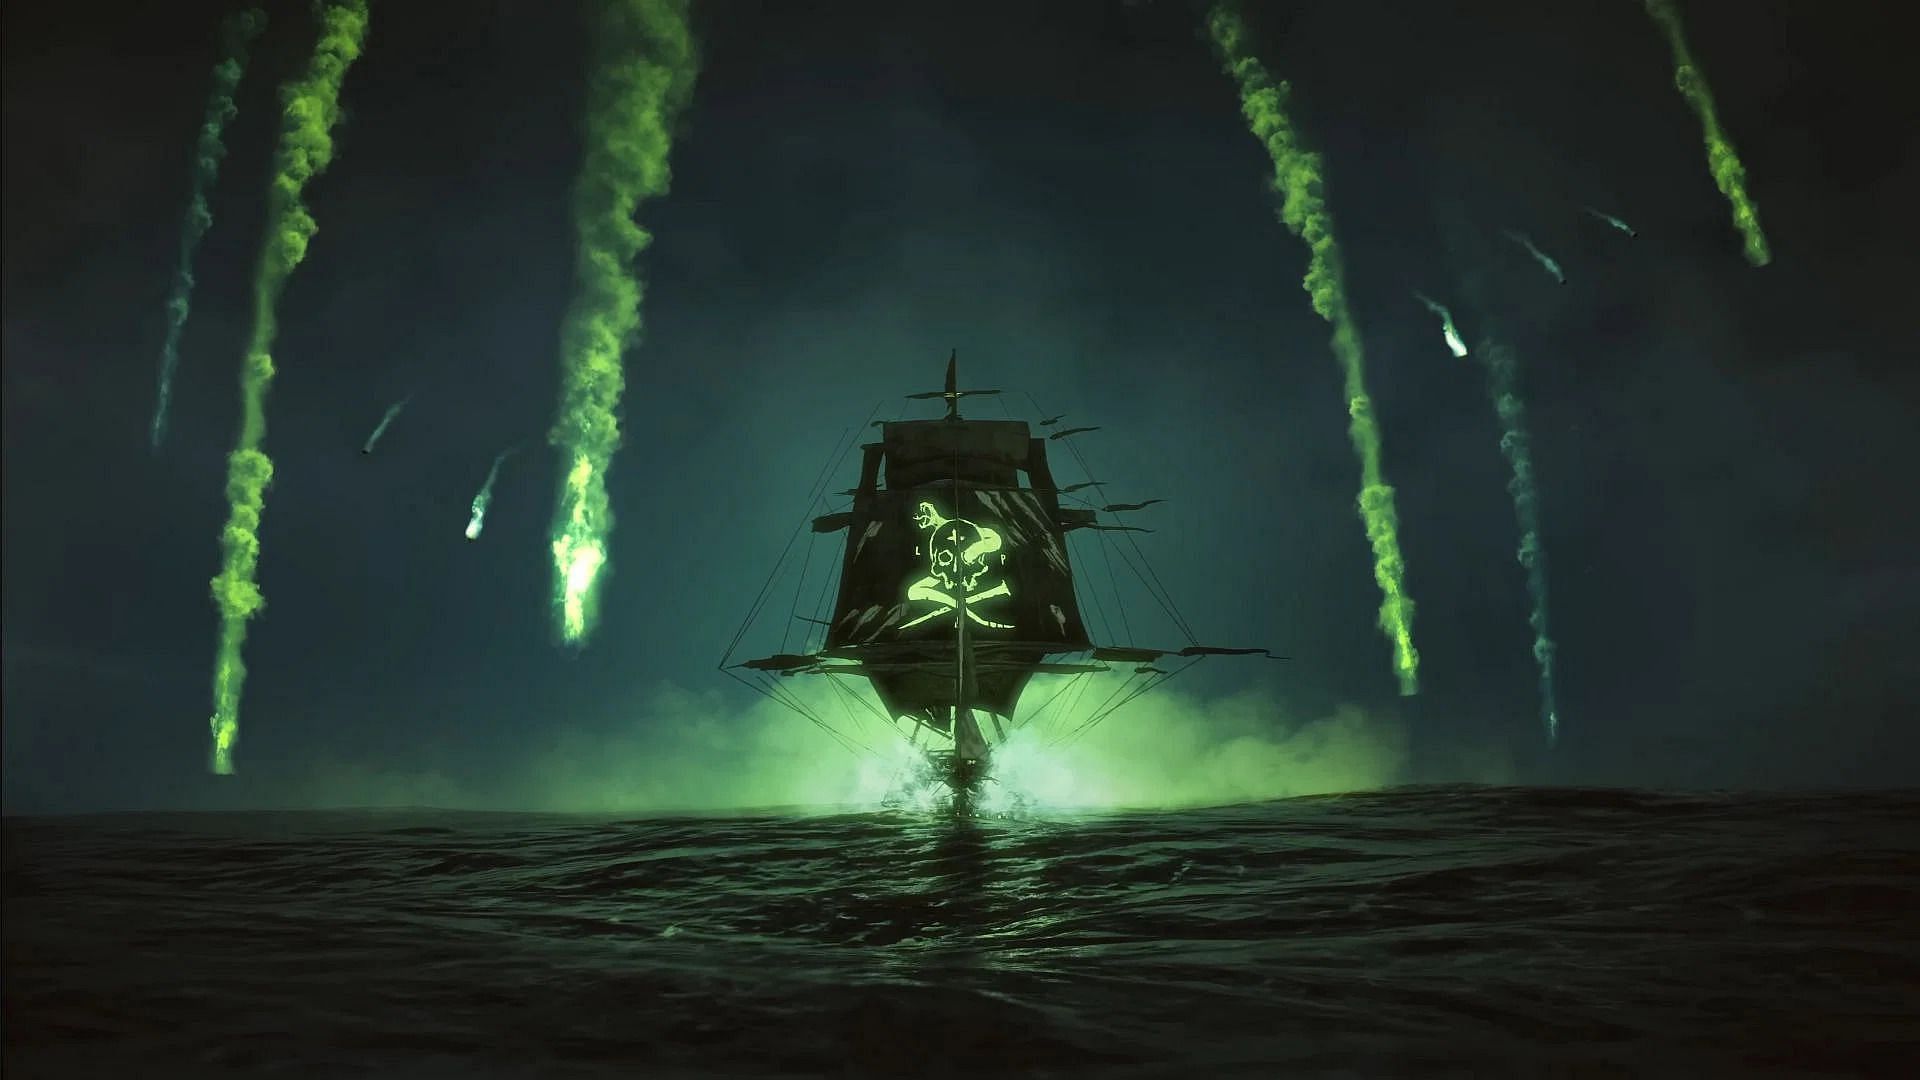 Skull and Bones ship names for players to use in their pirate adventures